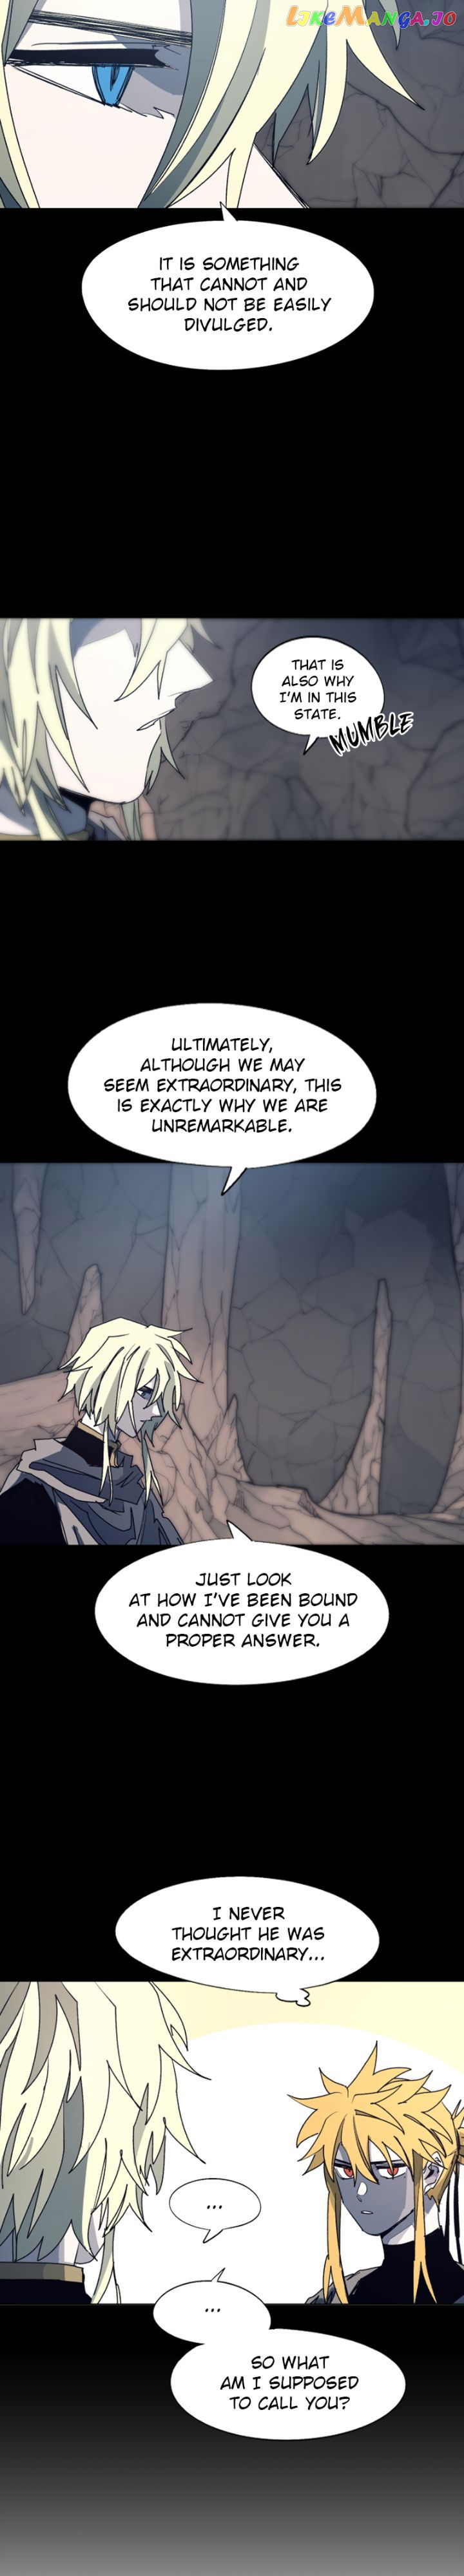 The Knight of Embers Chapter 120 page 3